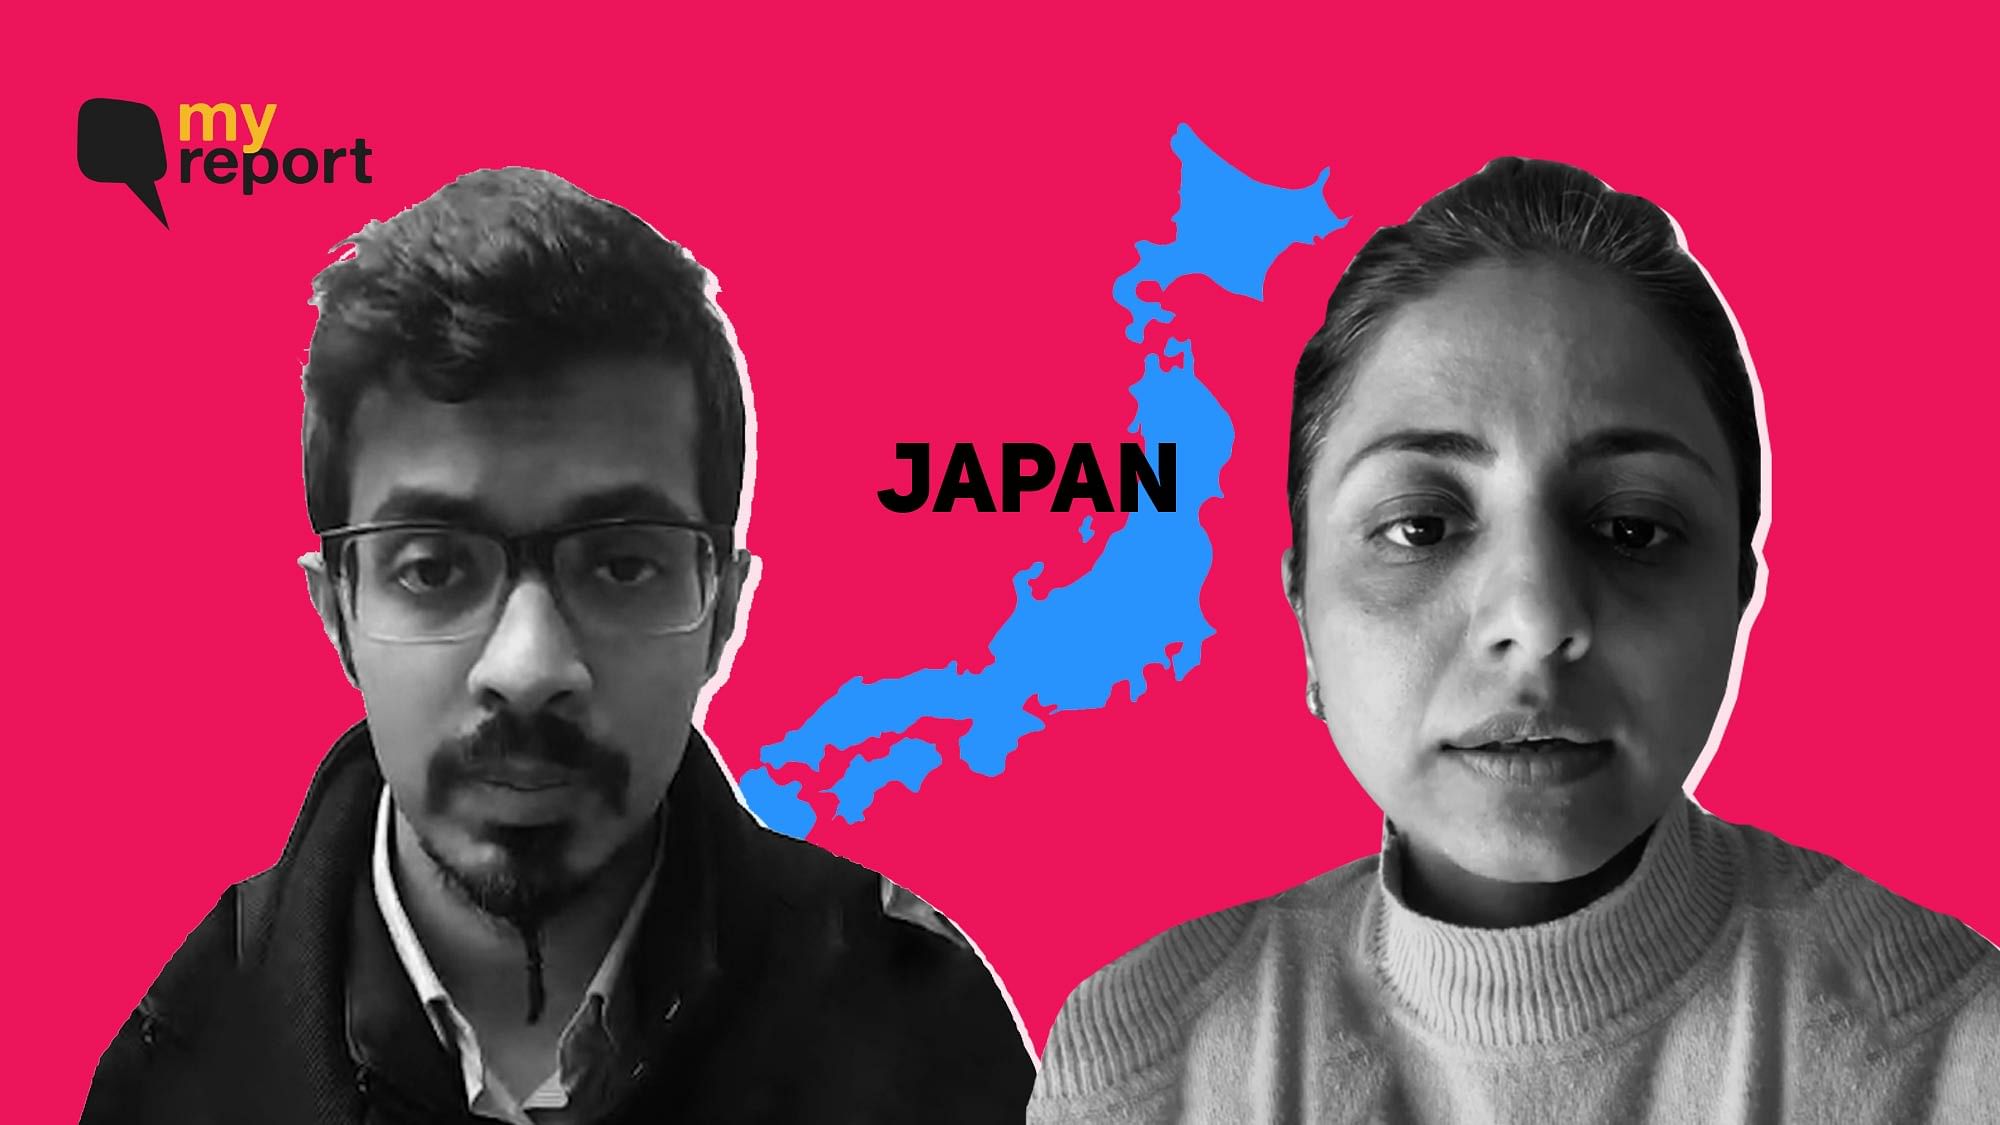 Anxiety mounts for Indians stranded in Japan amid the coronavirus pandemic.